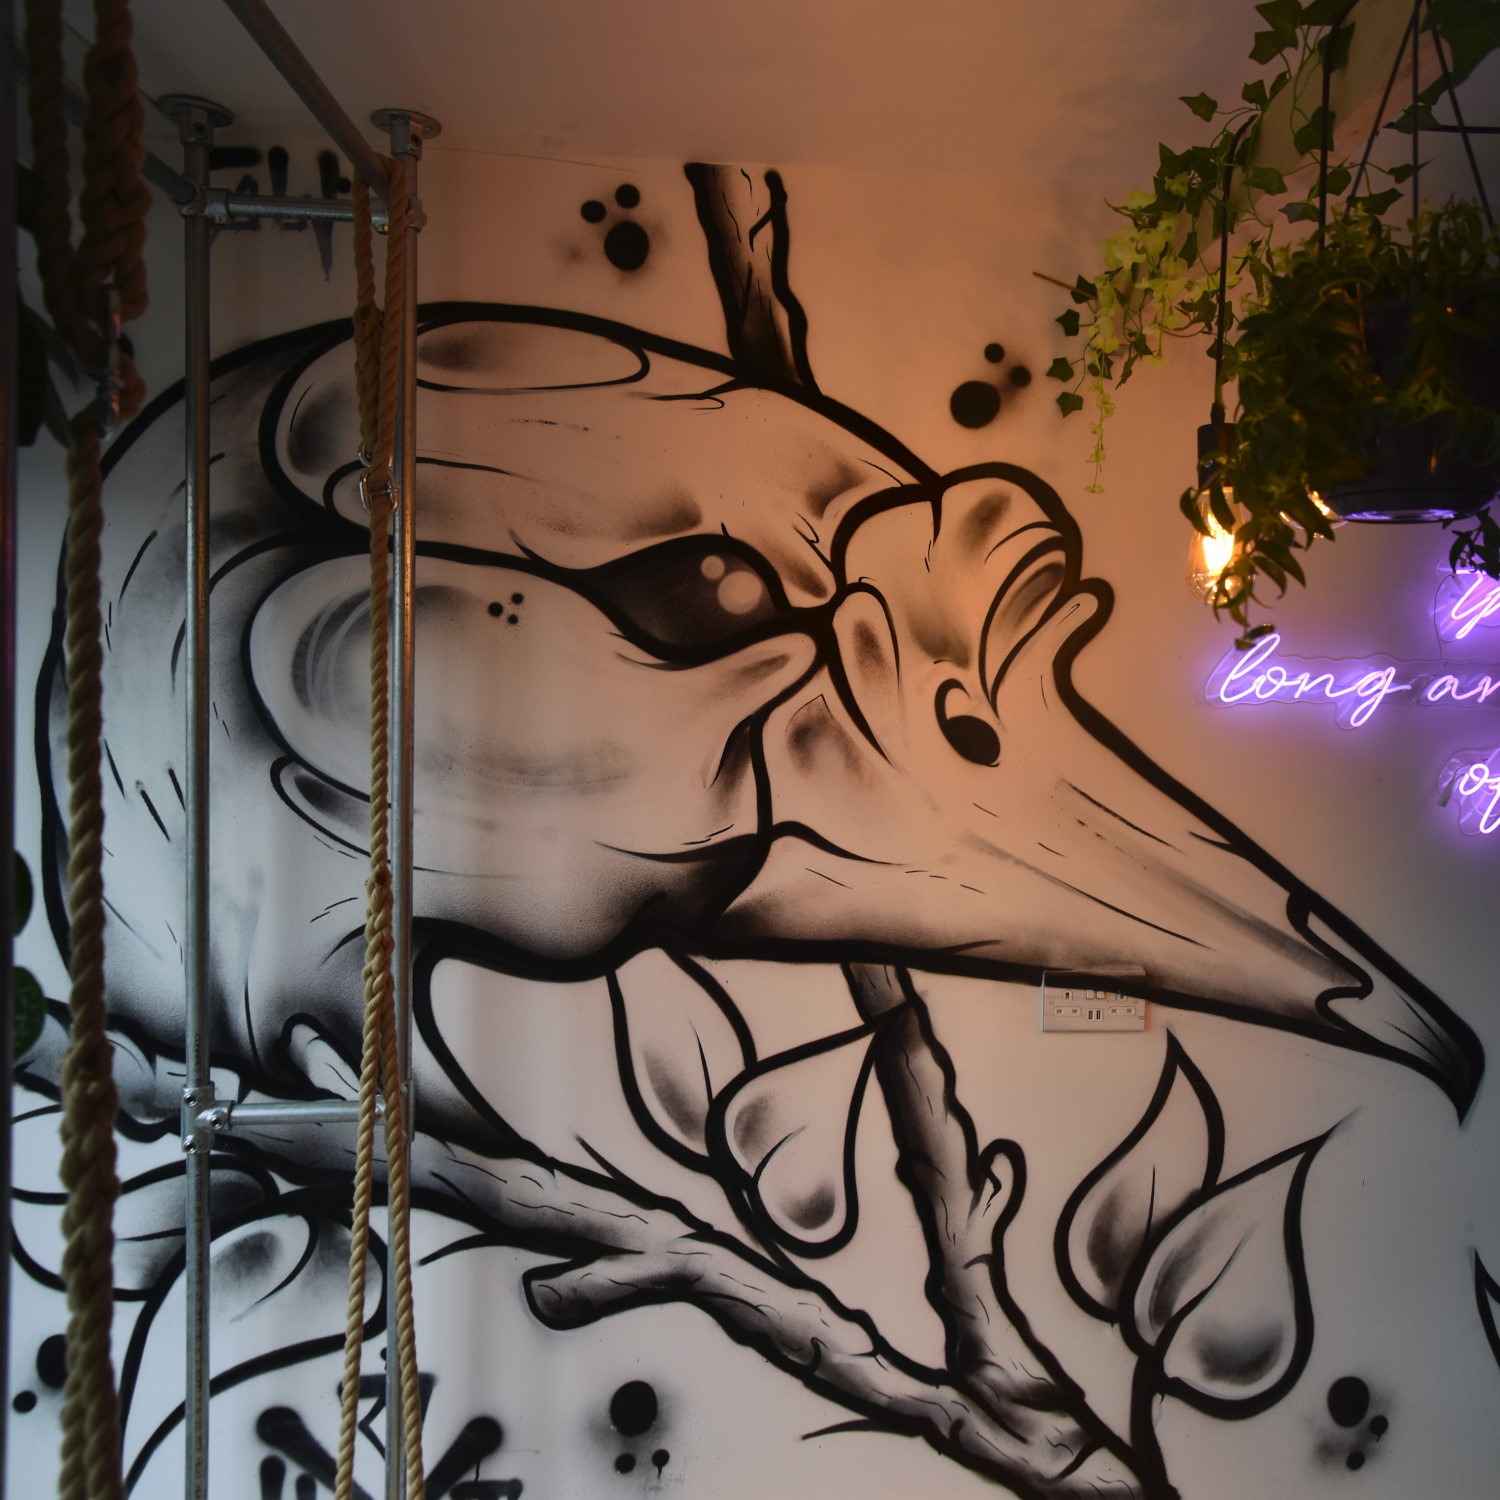 Part of the amazing mural on the wall of Long & Short Coffee in Walthamstow, showing a bird's head.